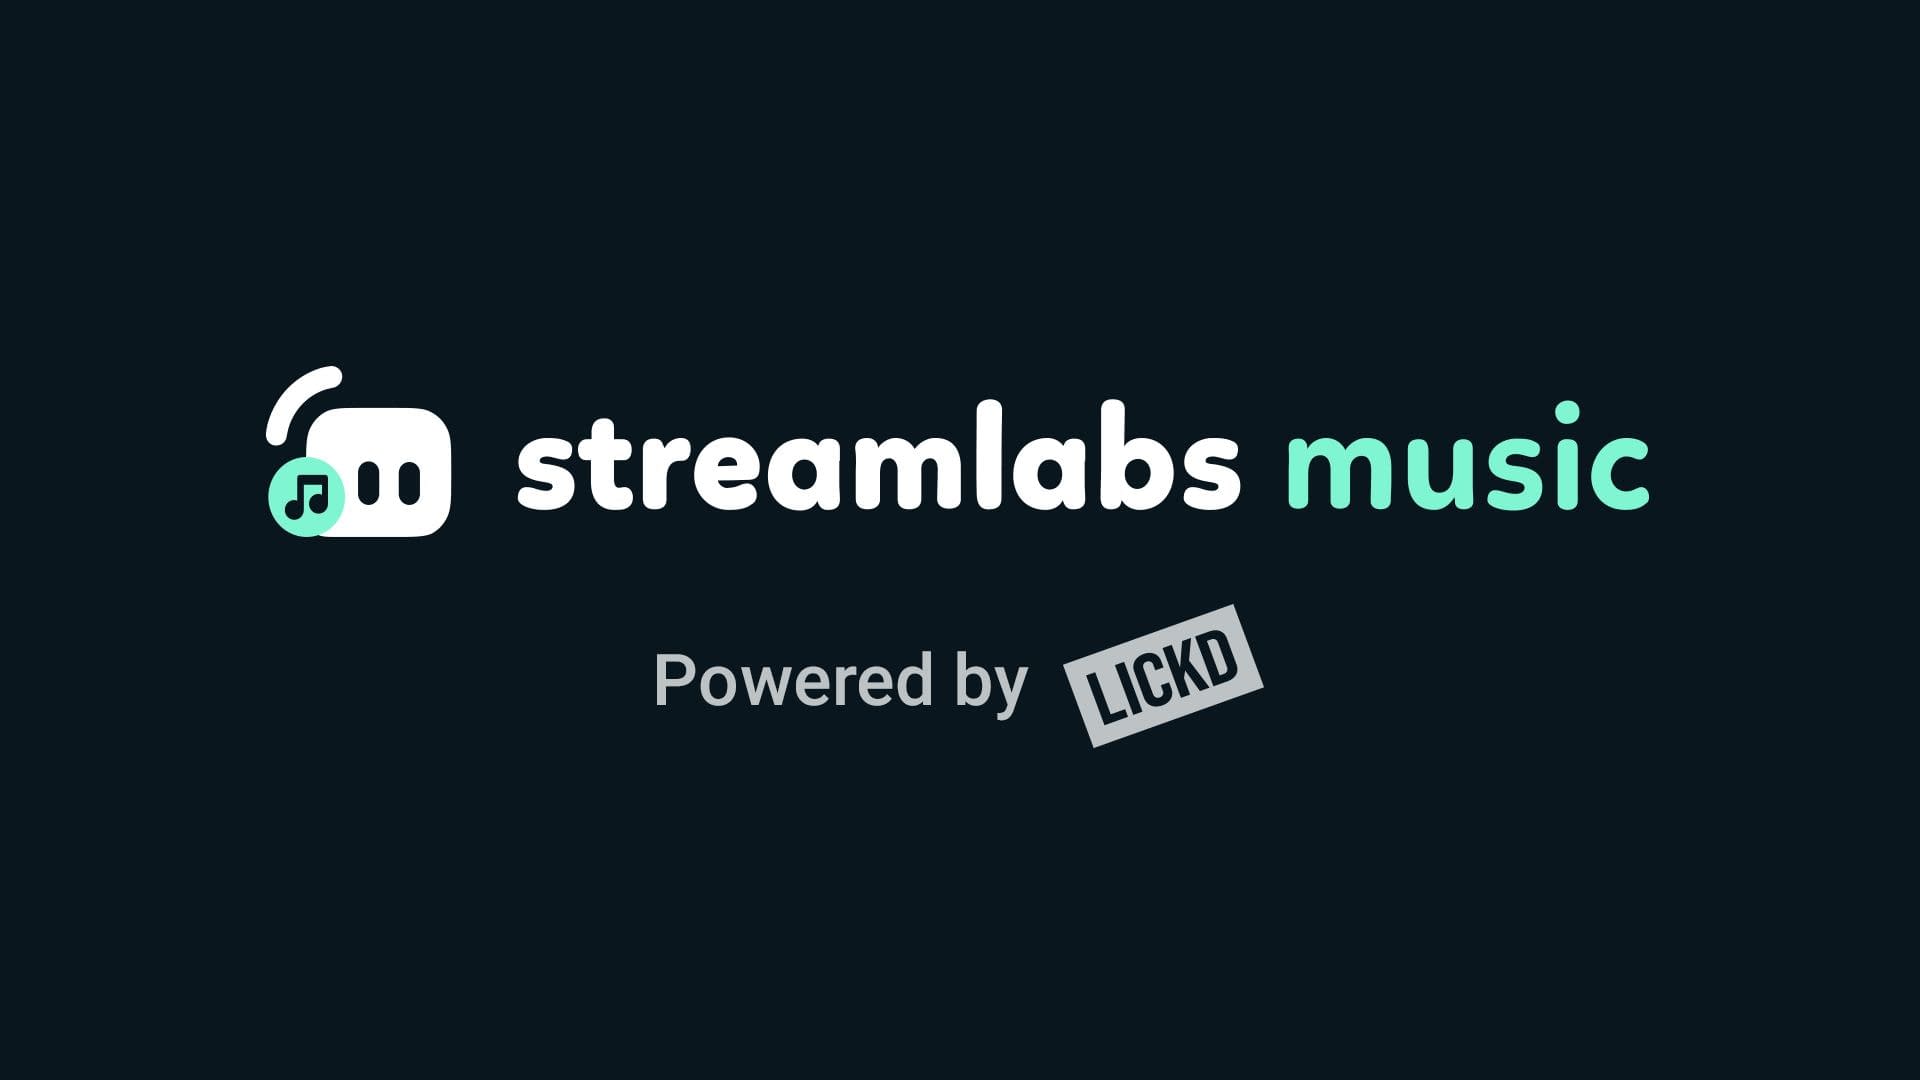 Getting Started with Streamlabs Music